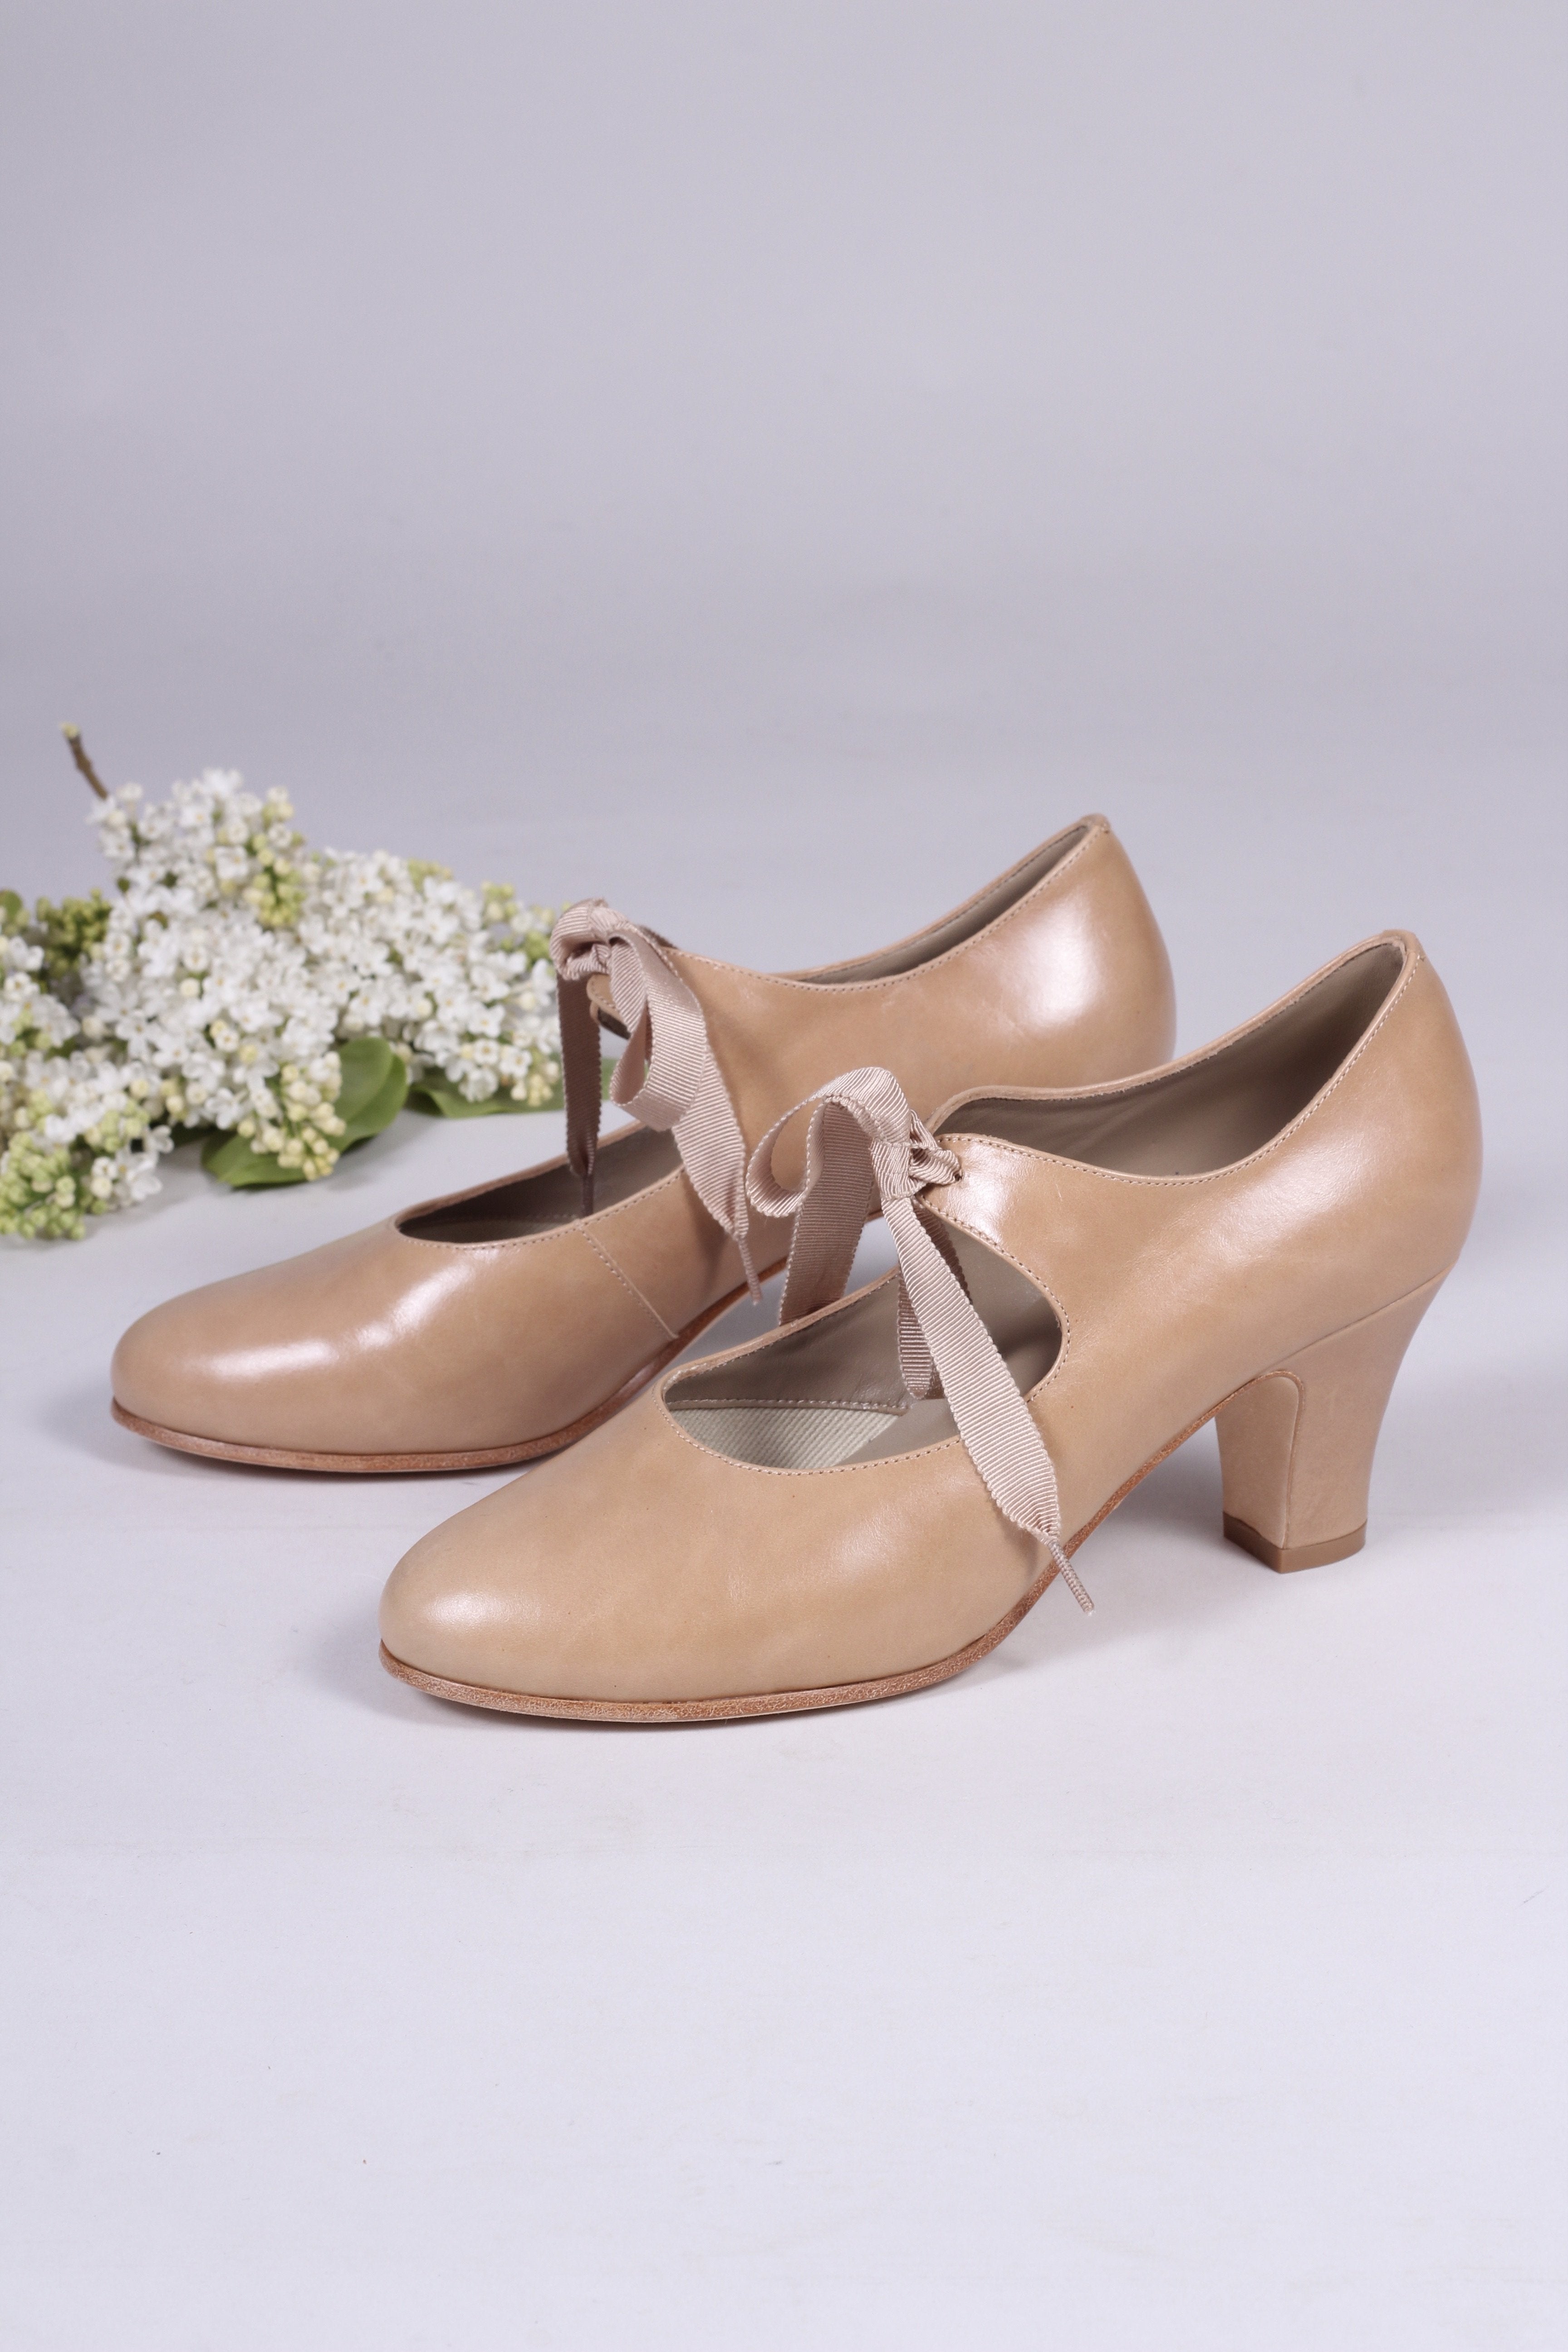 Late 1920's style pumps with shoe lace - Cream - Charlotte